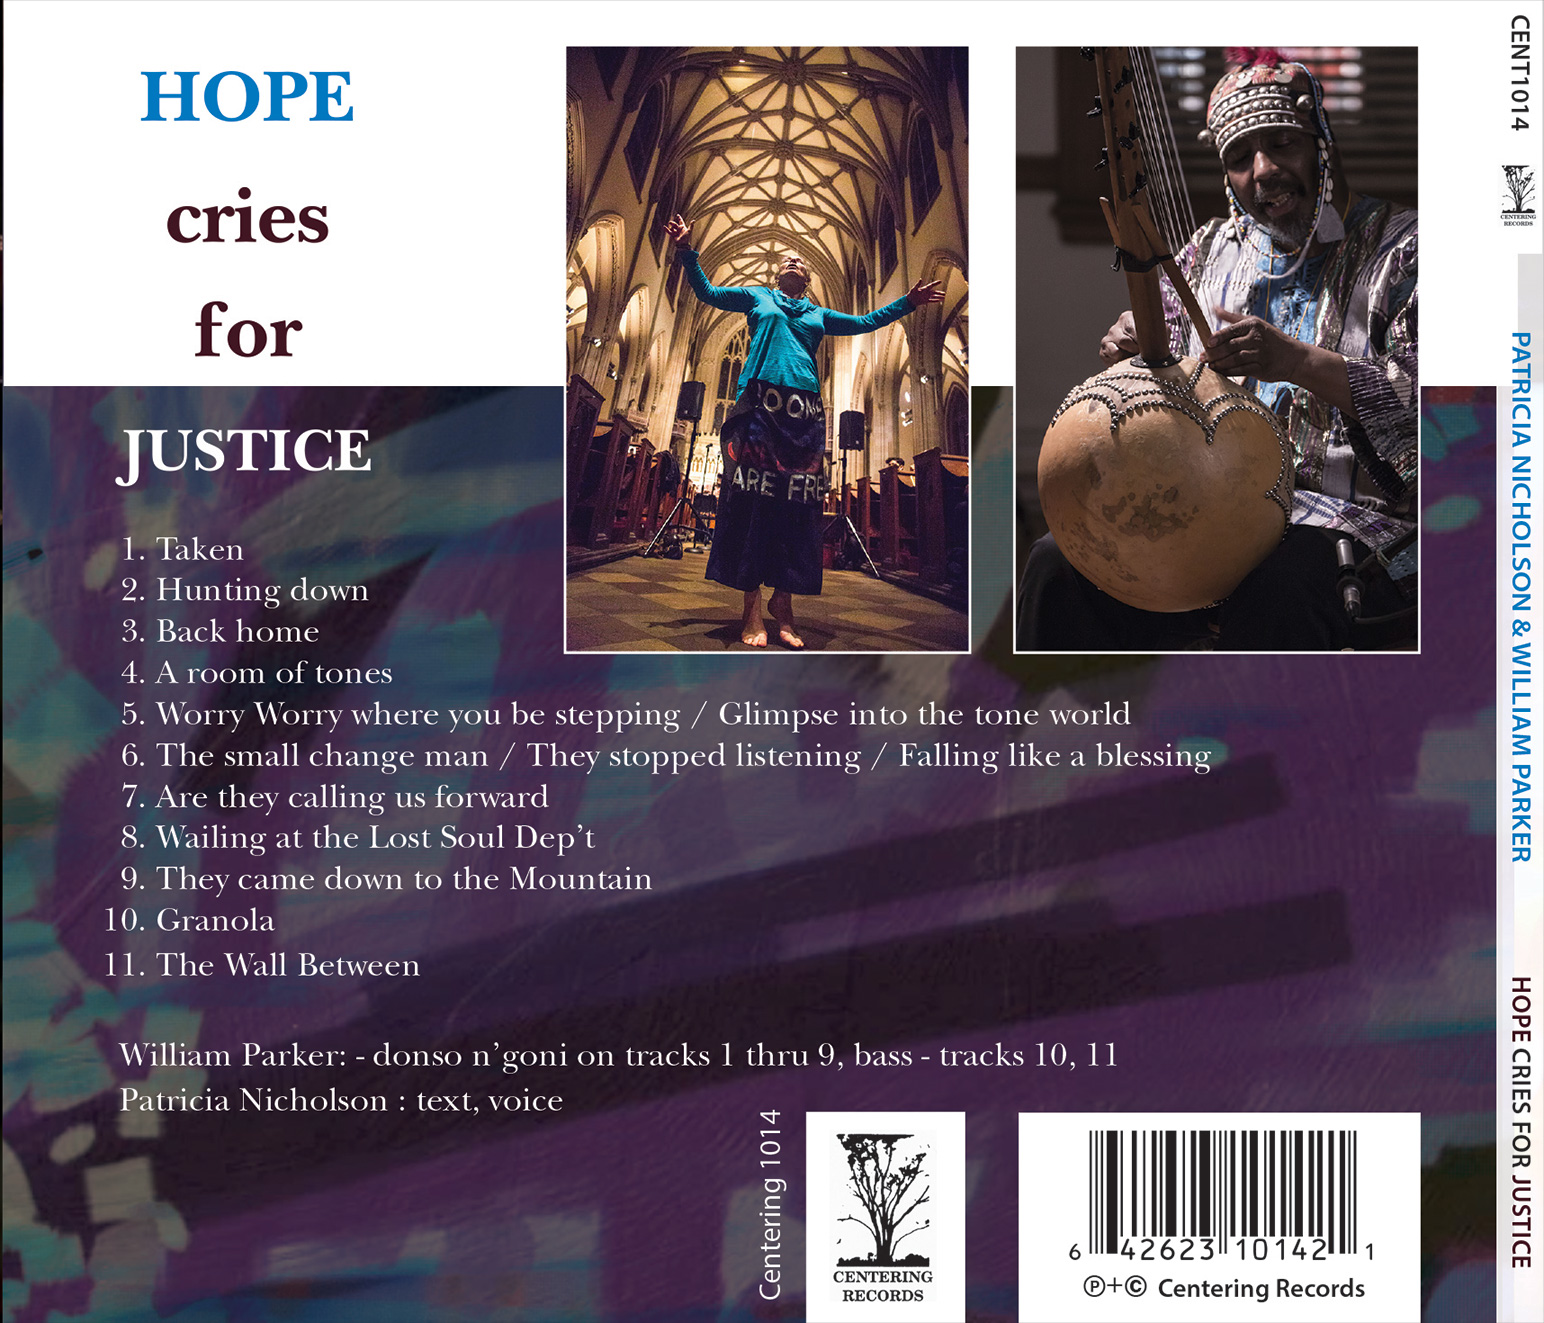 back cover Patrica Nicholson and William Parker's cd Hope Cries For Justice